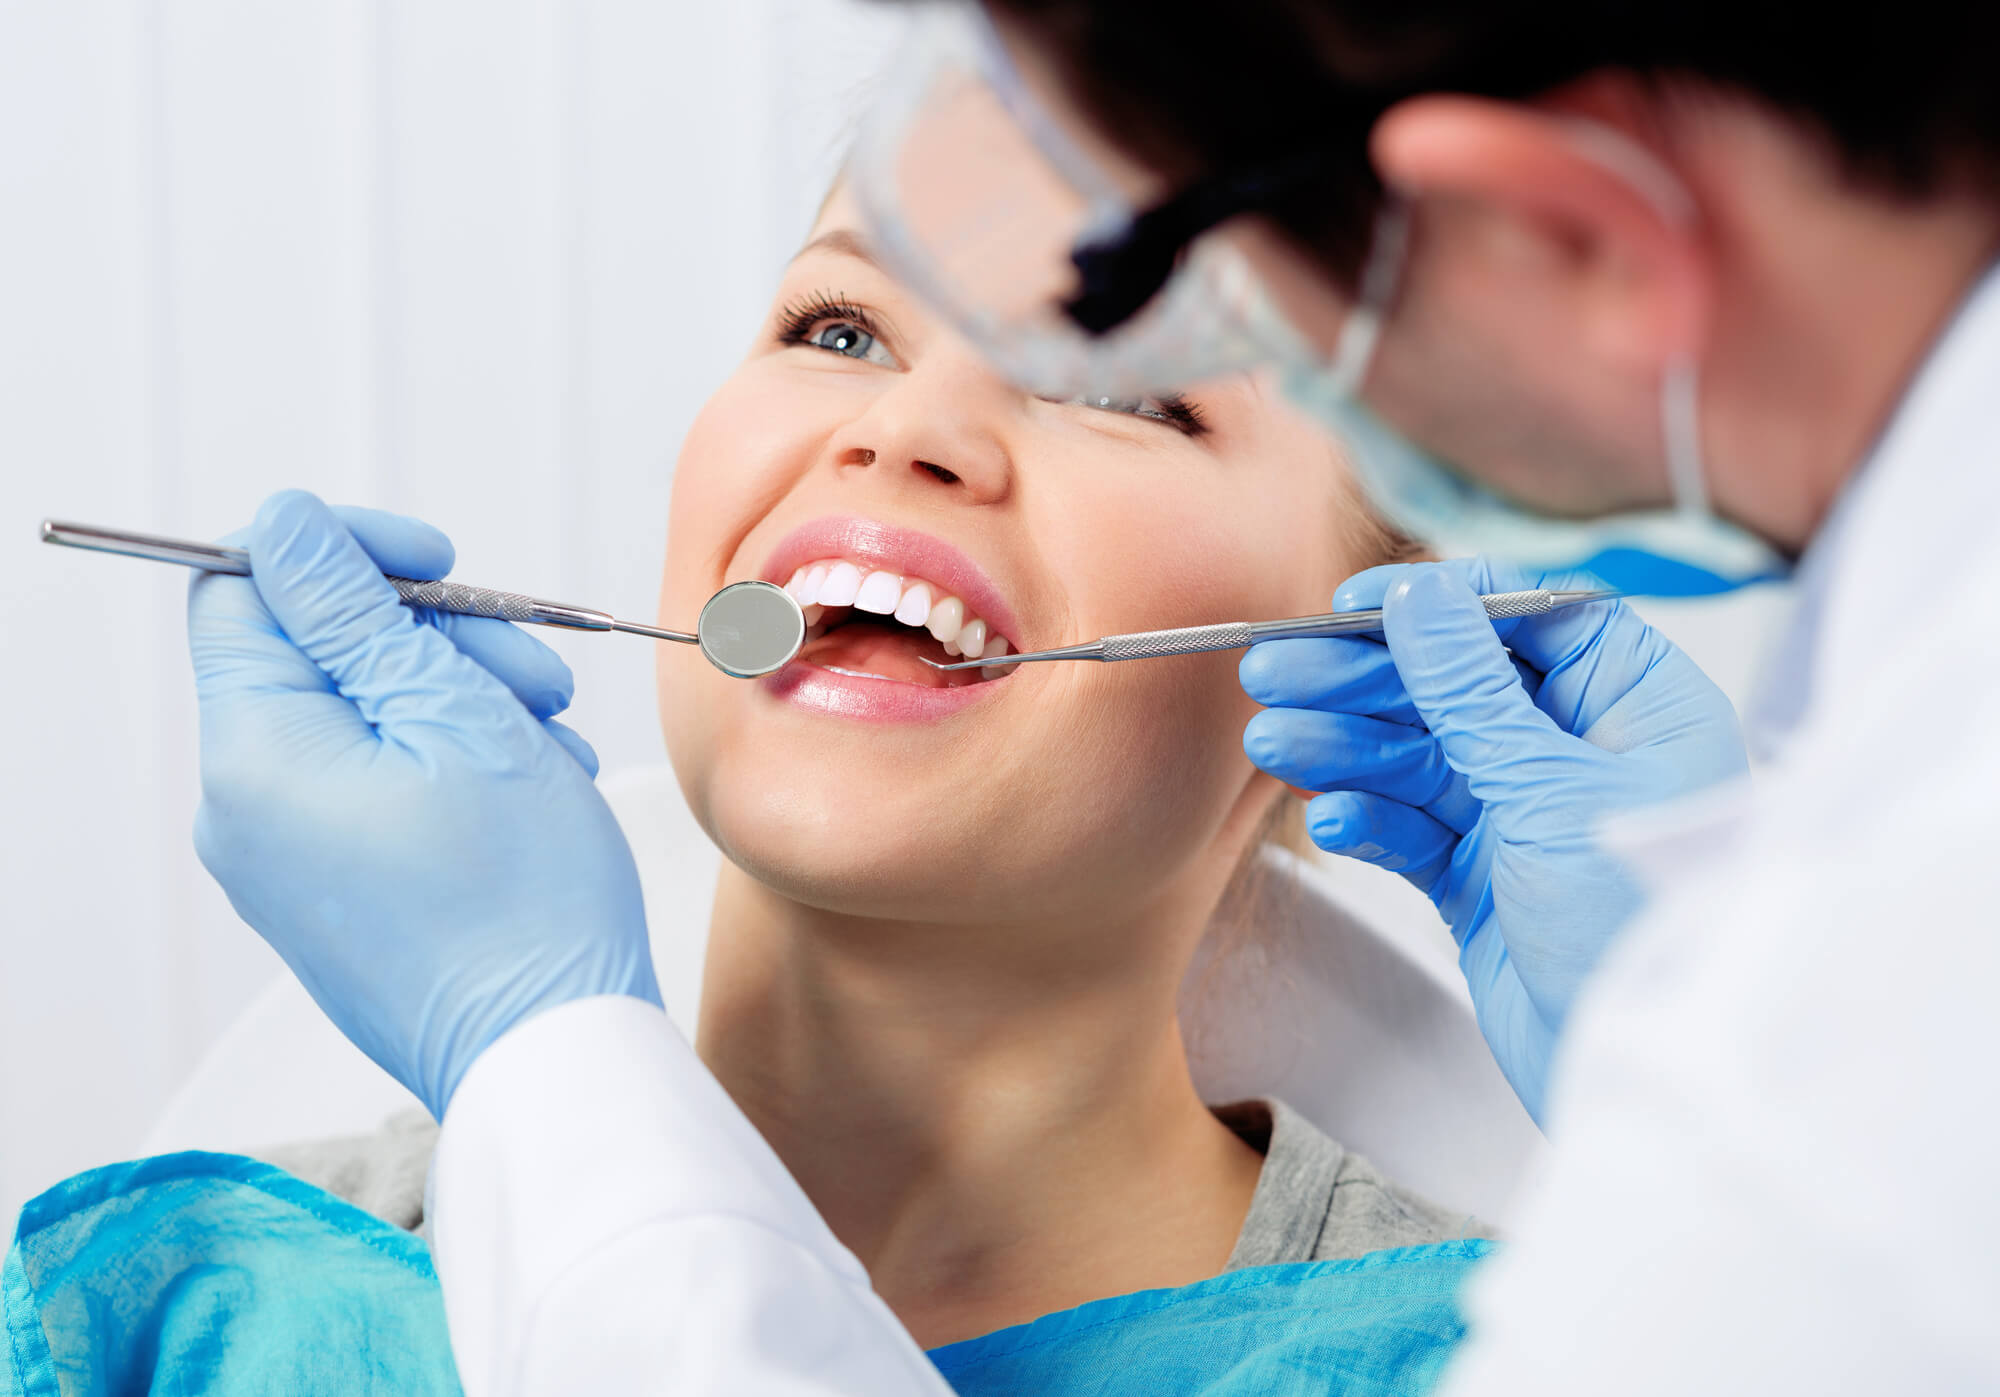 Periodontist in Boca Raton performing an oral exam